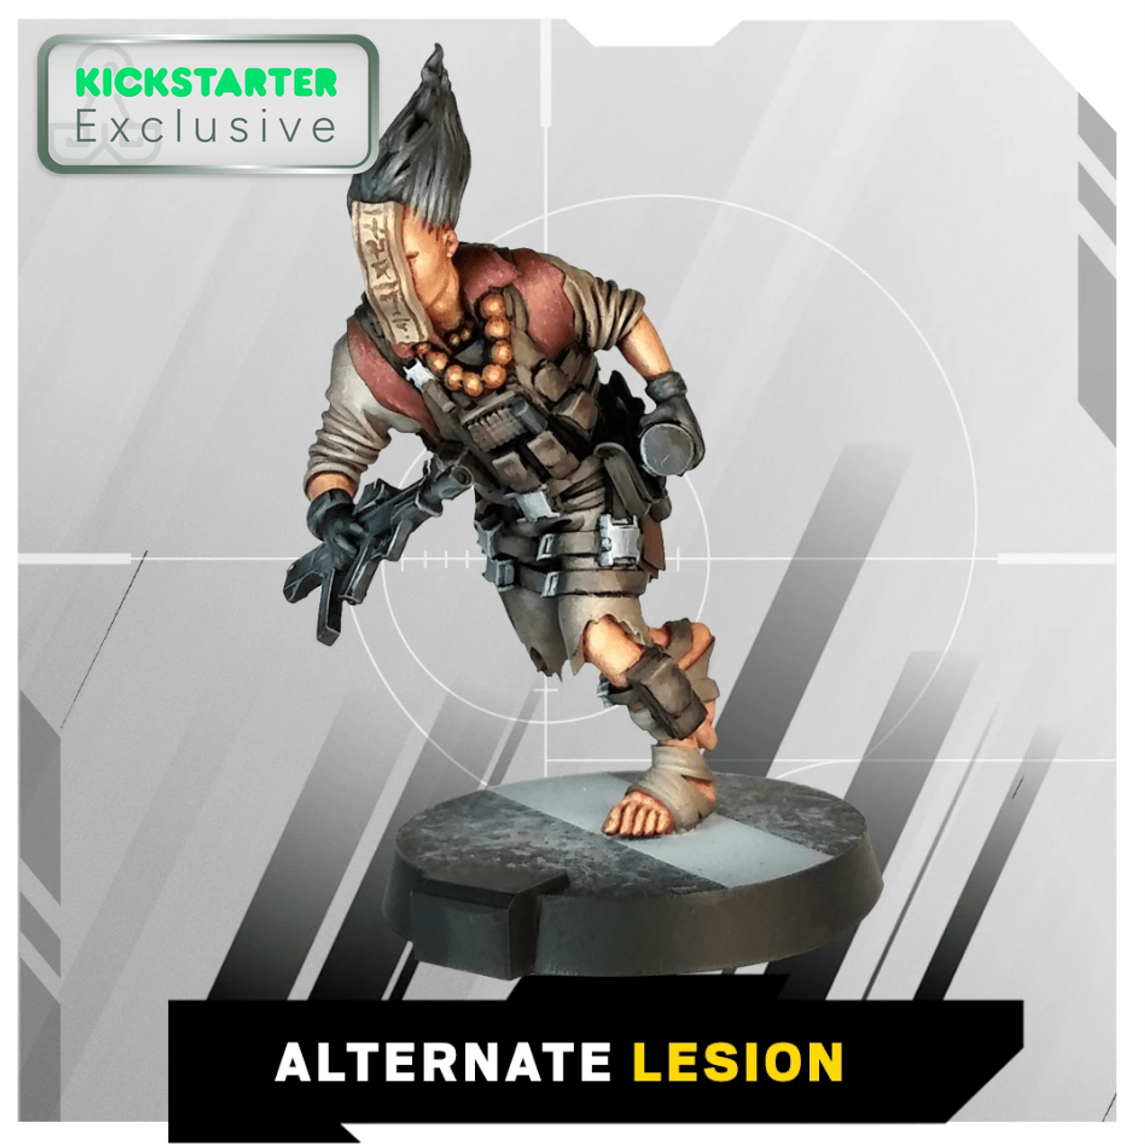 Kickstarter Exclusive Year 2 Expansion, Alternate Lesion Miniature Painted, From 6: Siege - The Board Game